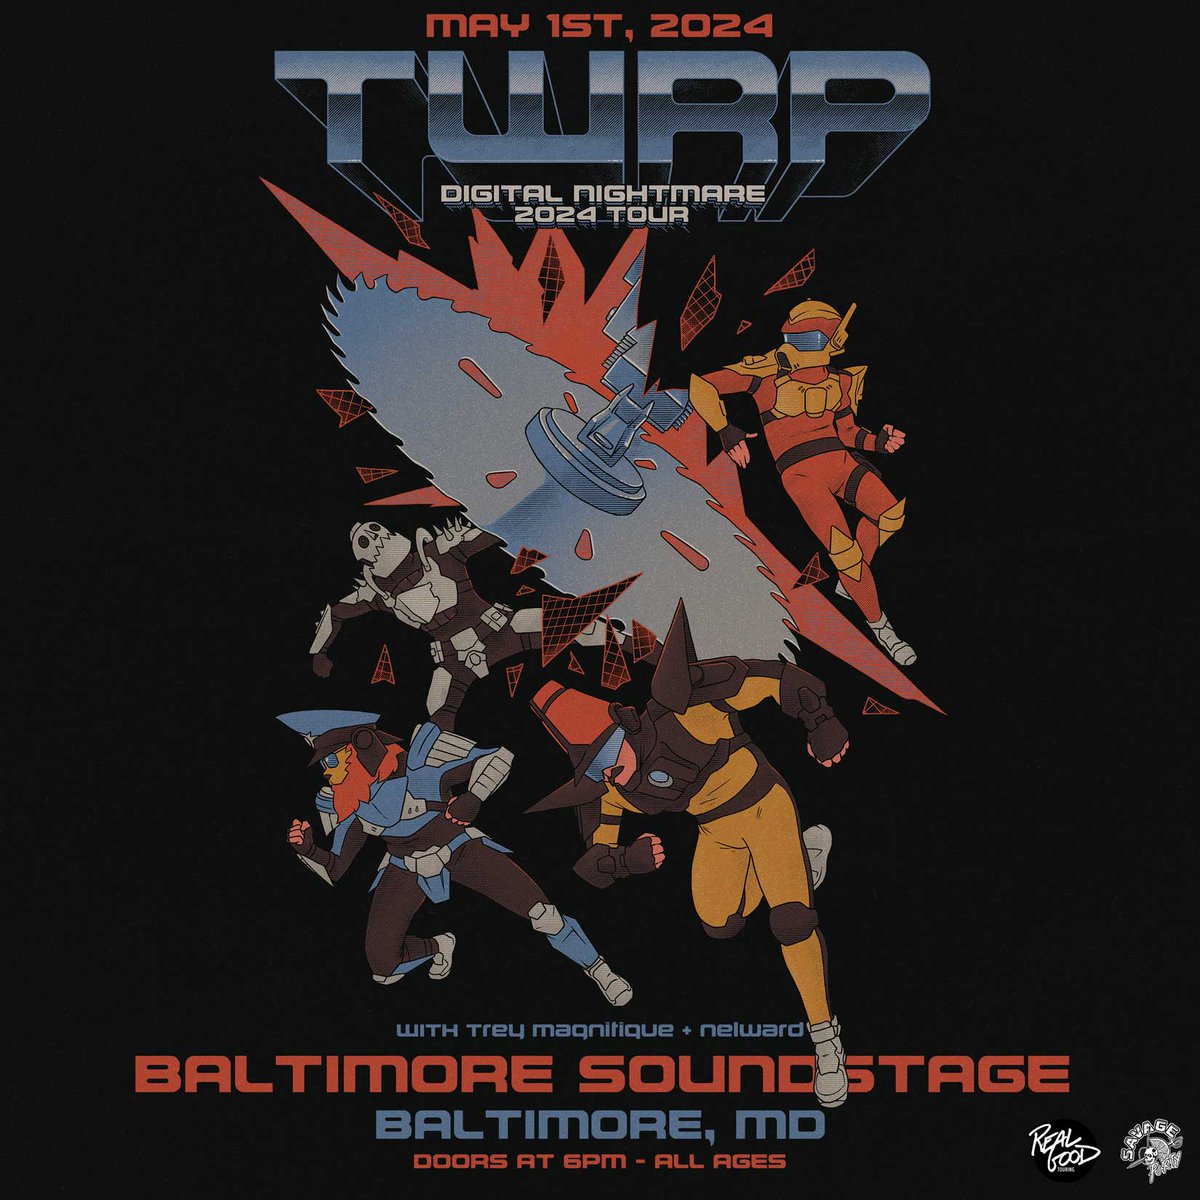 TONIGHT! @TWRPband with special guests Trey Magnifique + @nelward64! Tickets available at the door. 7:00 PM Nelward 7:45 PM Trey Magnifique 8:45 PM TWRP